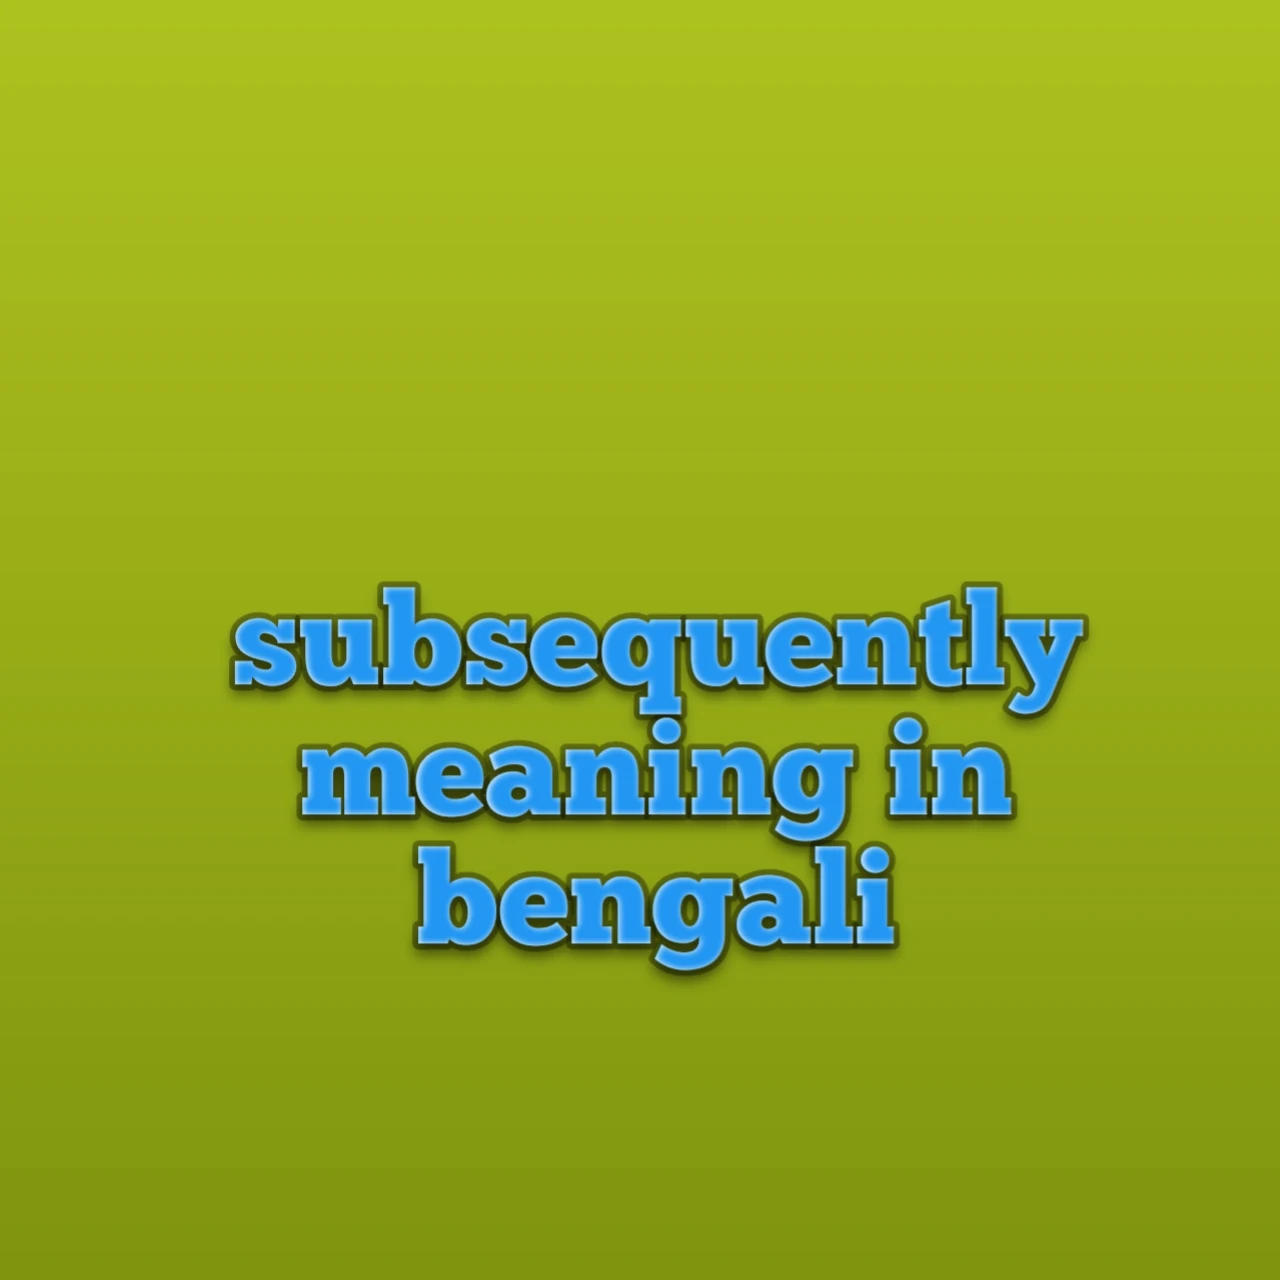 subsequently meaning in bengali, meaning of subsequently, subsequently meaning, subsequently